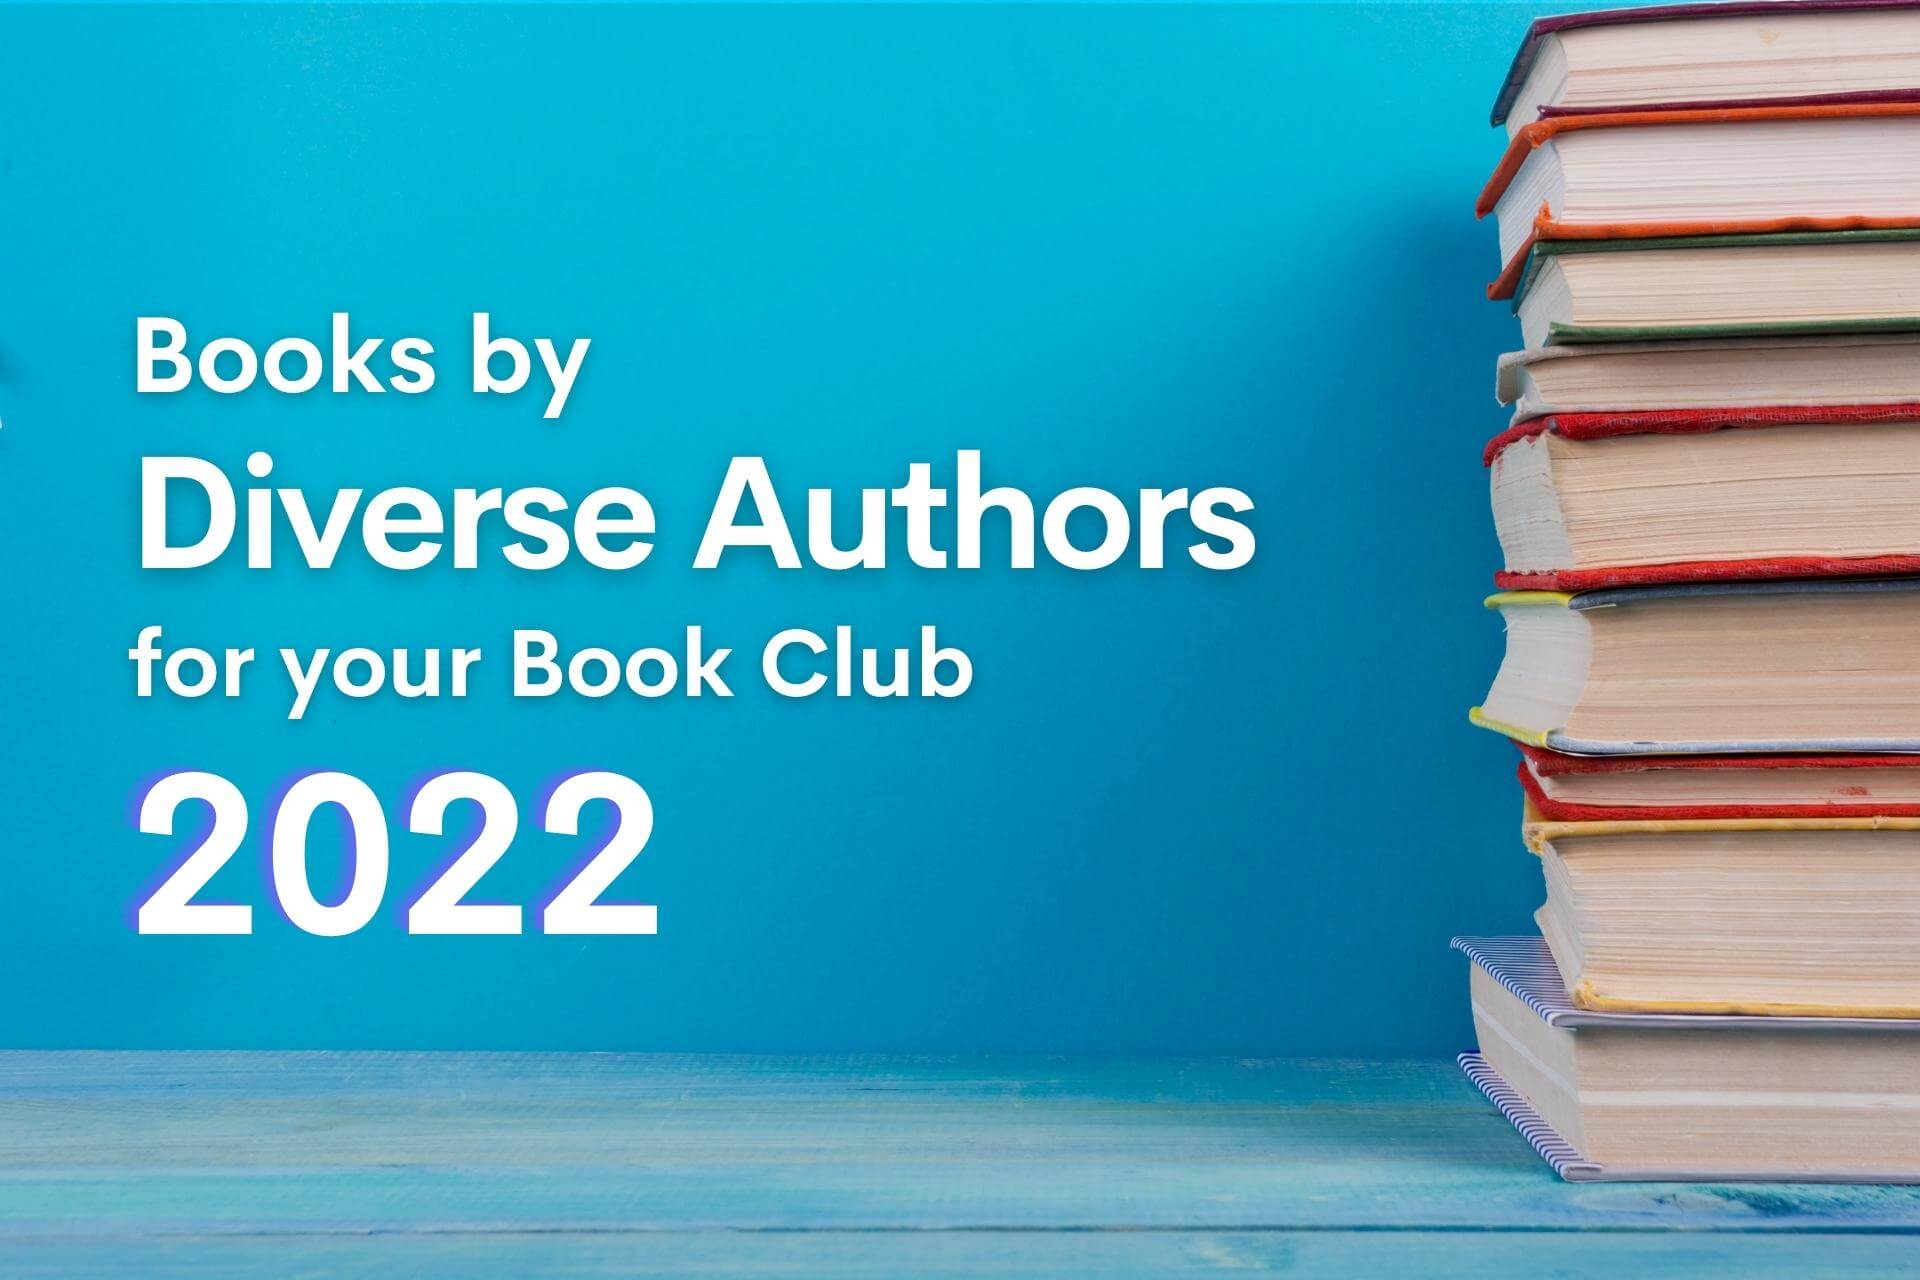 Books by Diverse Authors for your Book Club in 2022